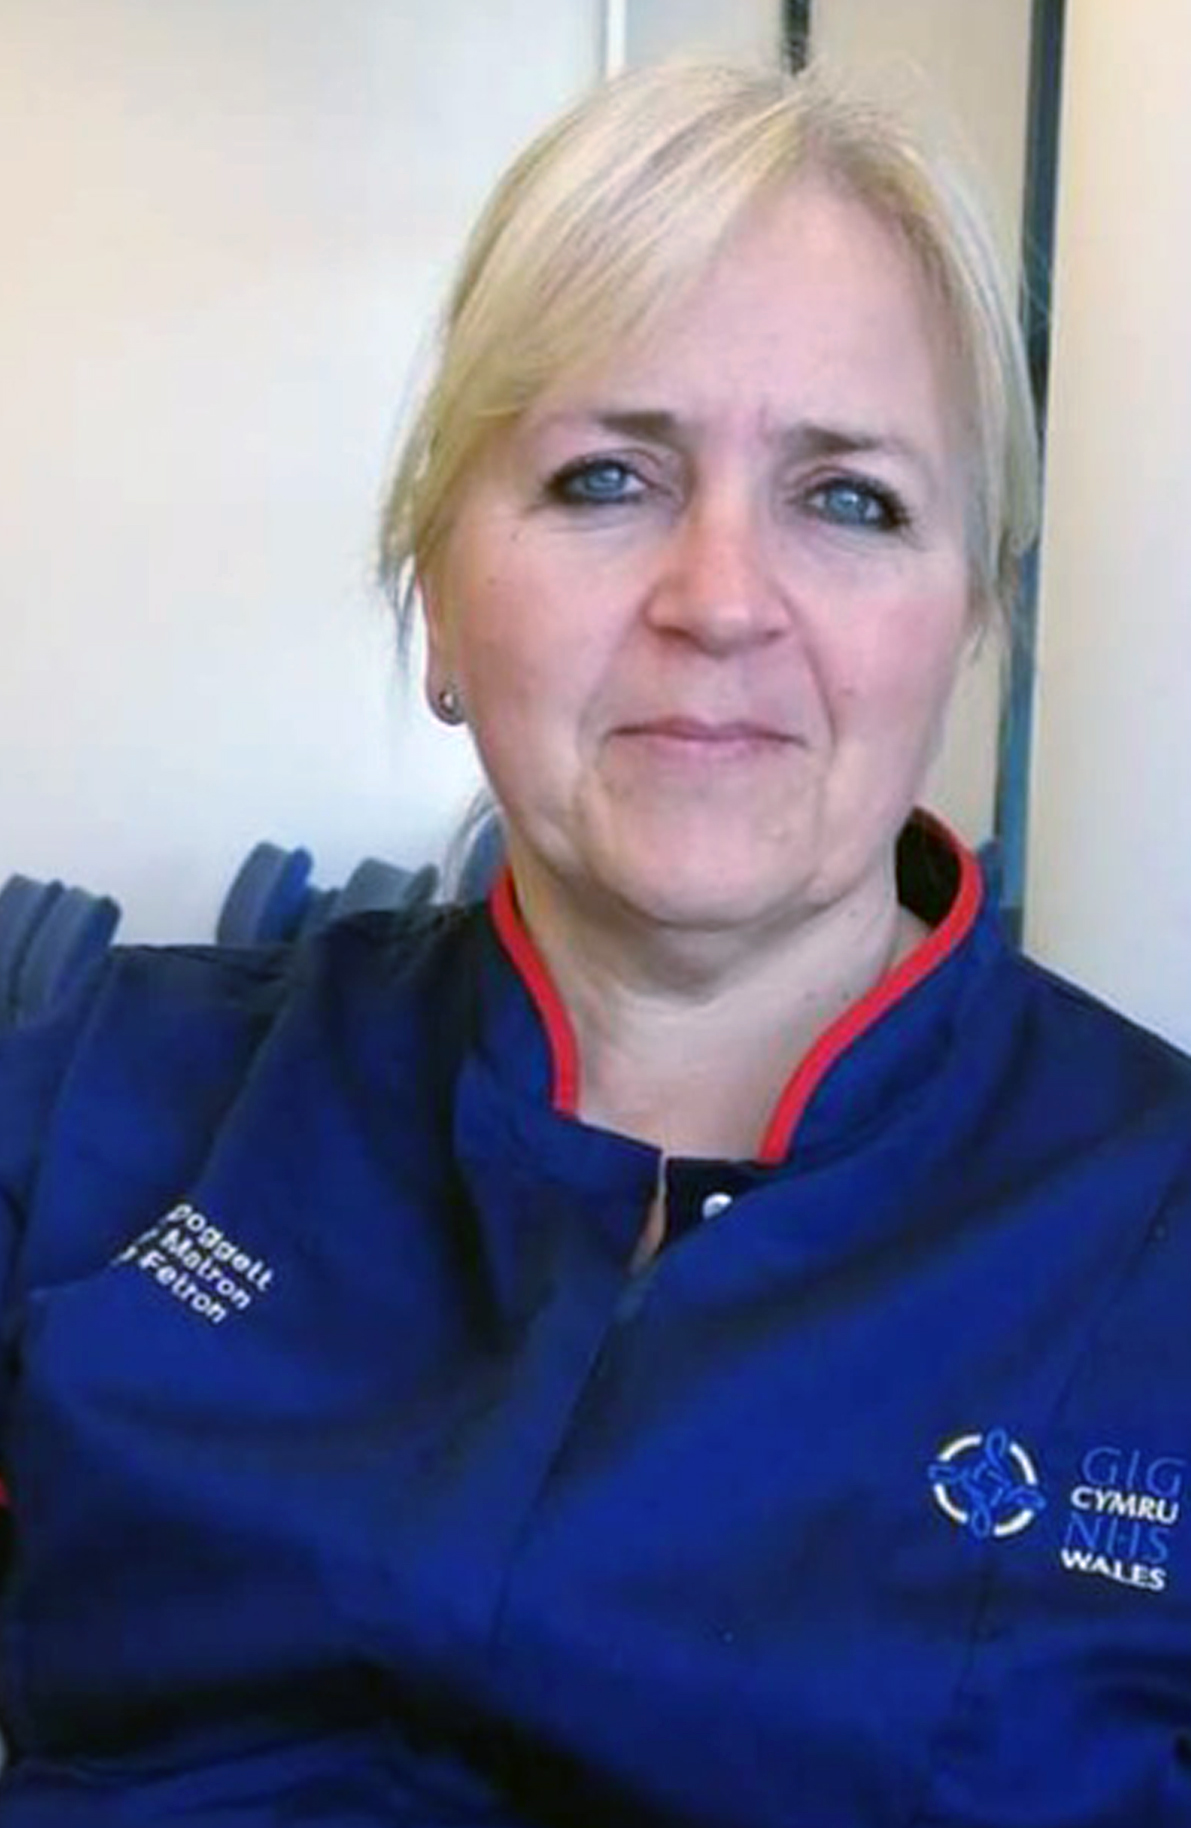 Carol Doggett is one of the nurses caring for sick patients at Morriston Hospital (Swansea Bay University Health Board/PA).